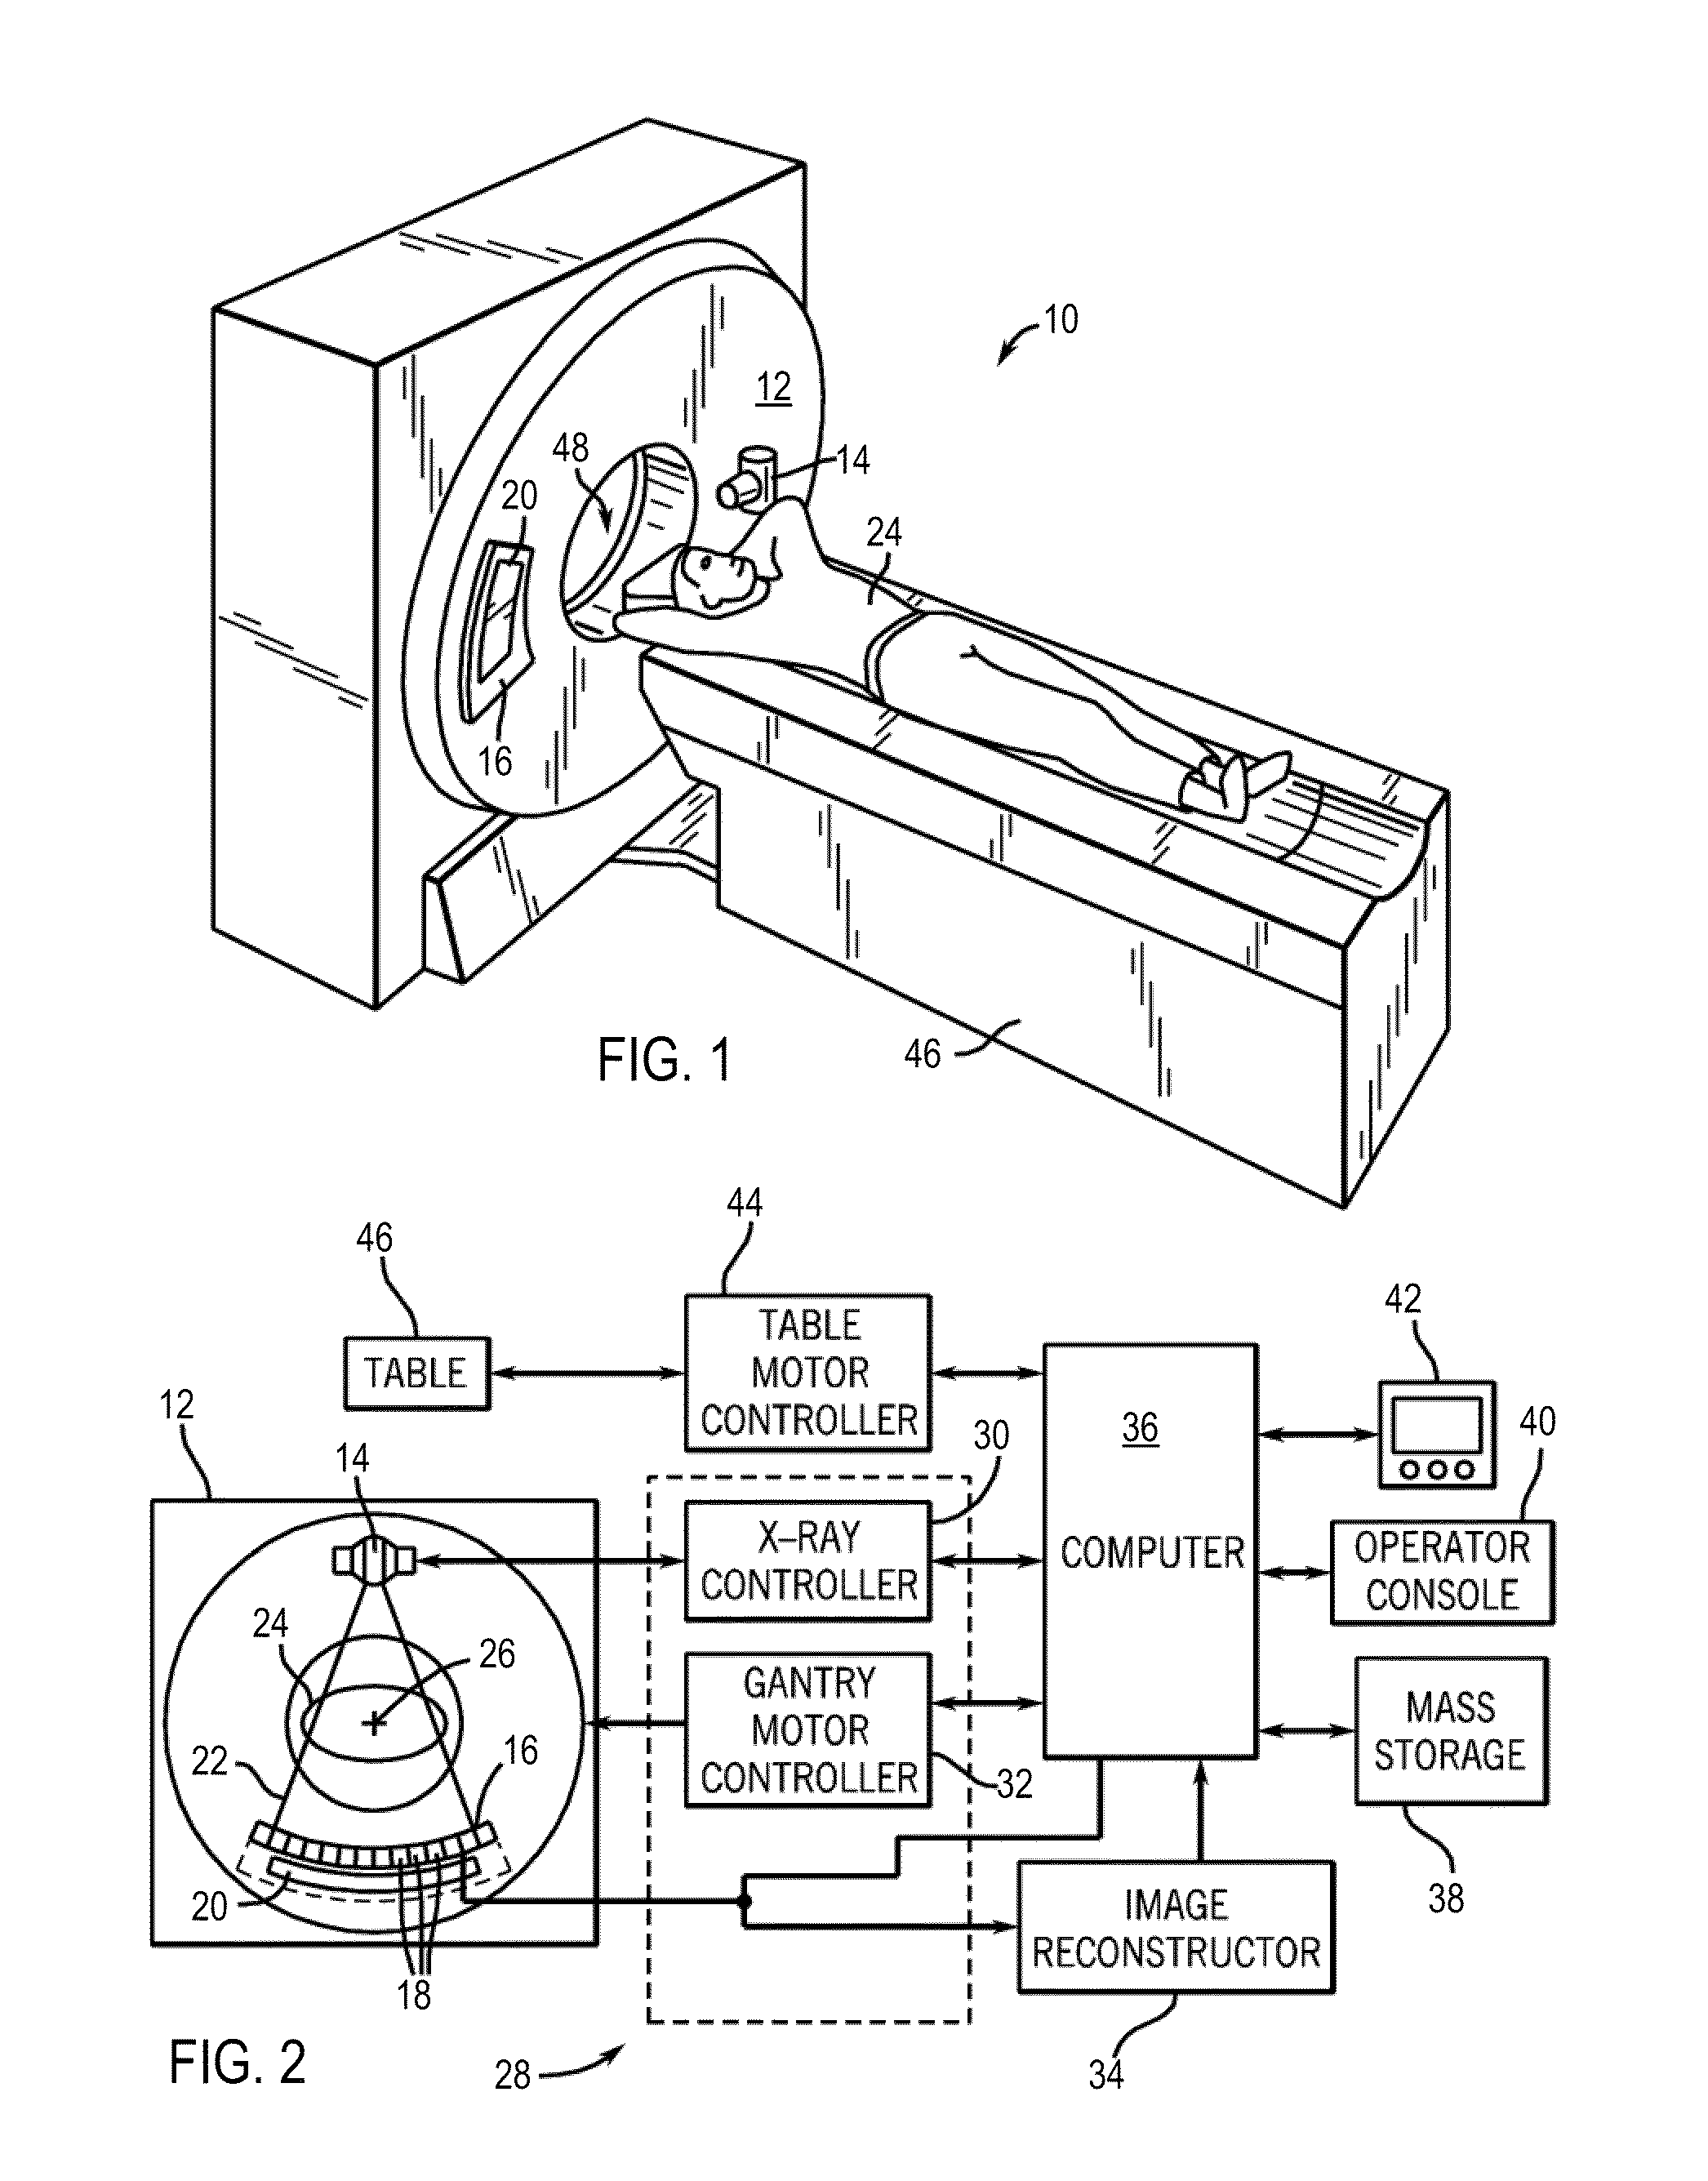 Apparatus for reducing photodiode thermal gain coefficient and method of making same